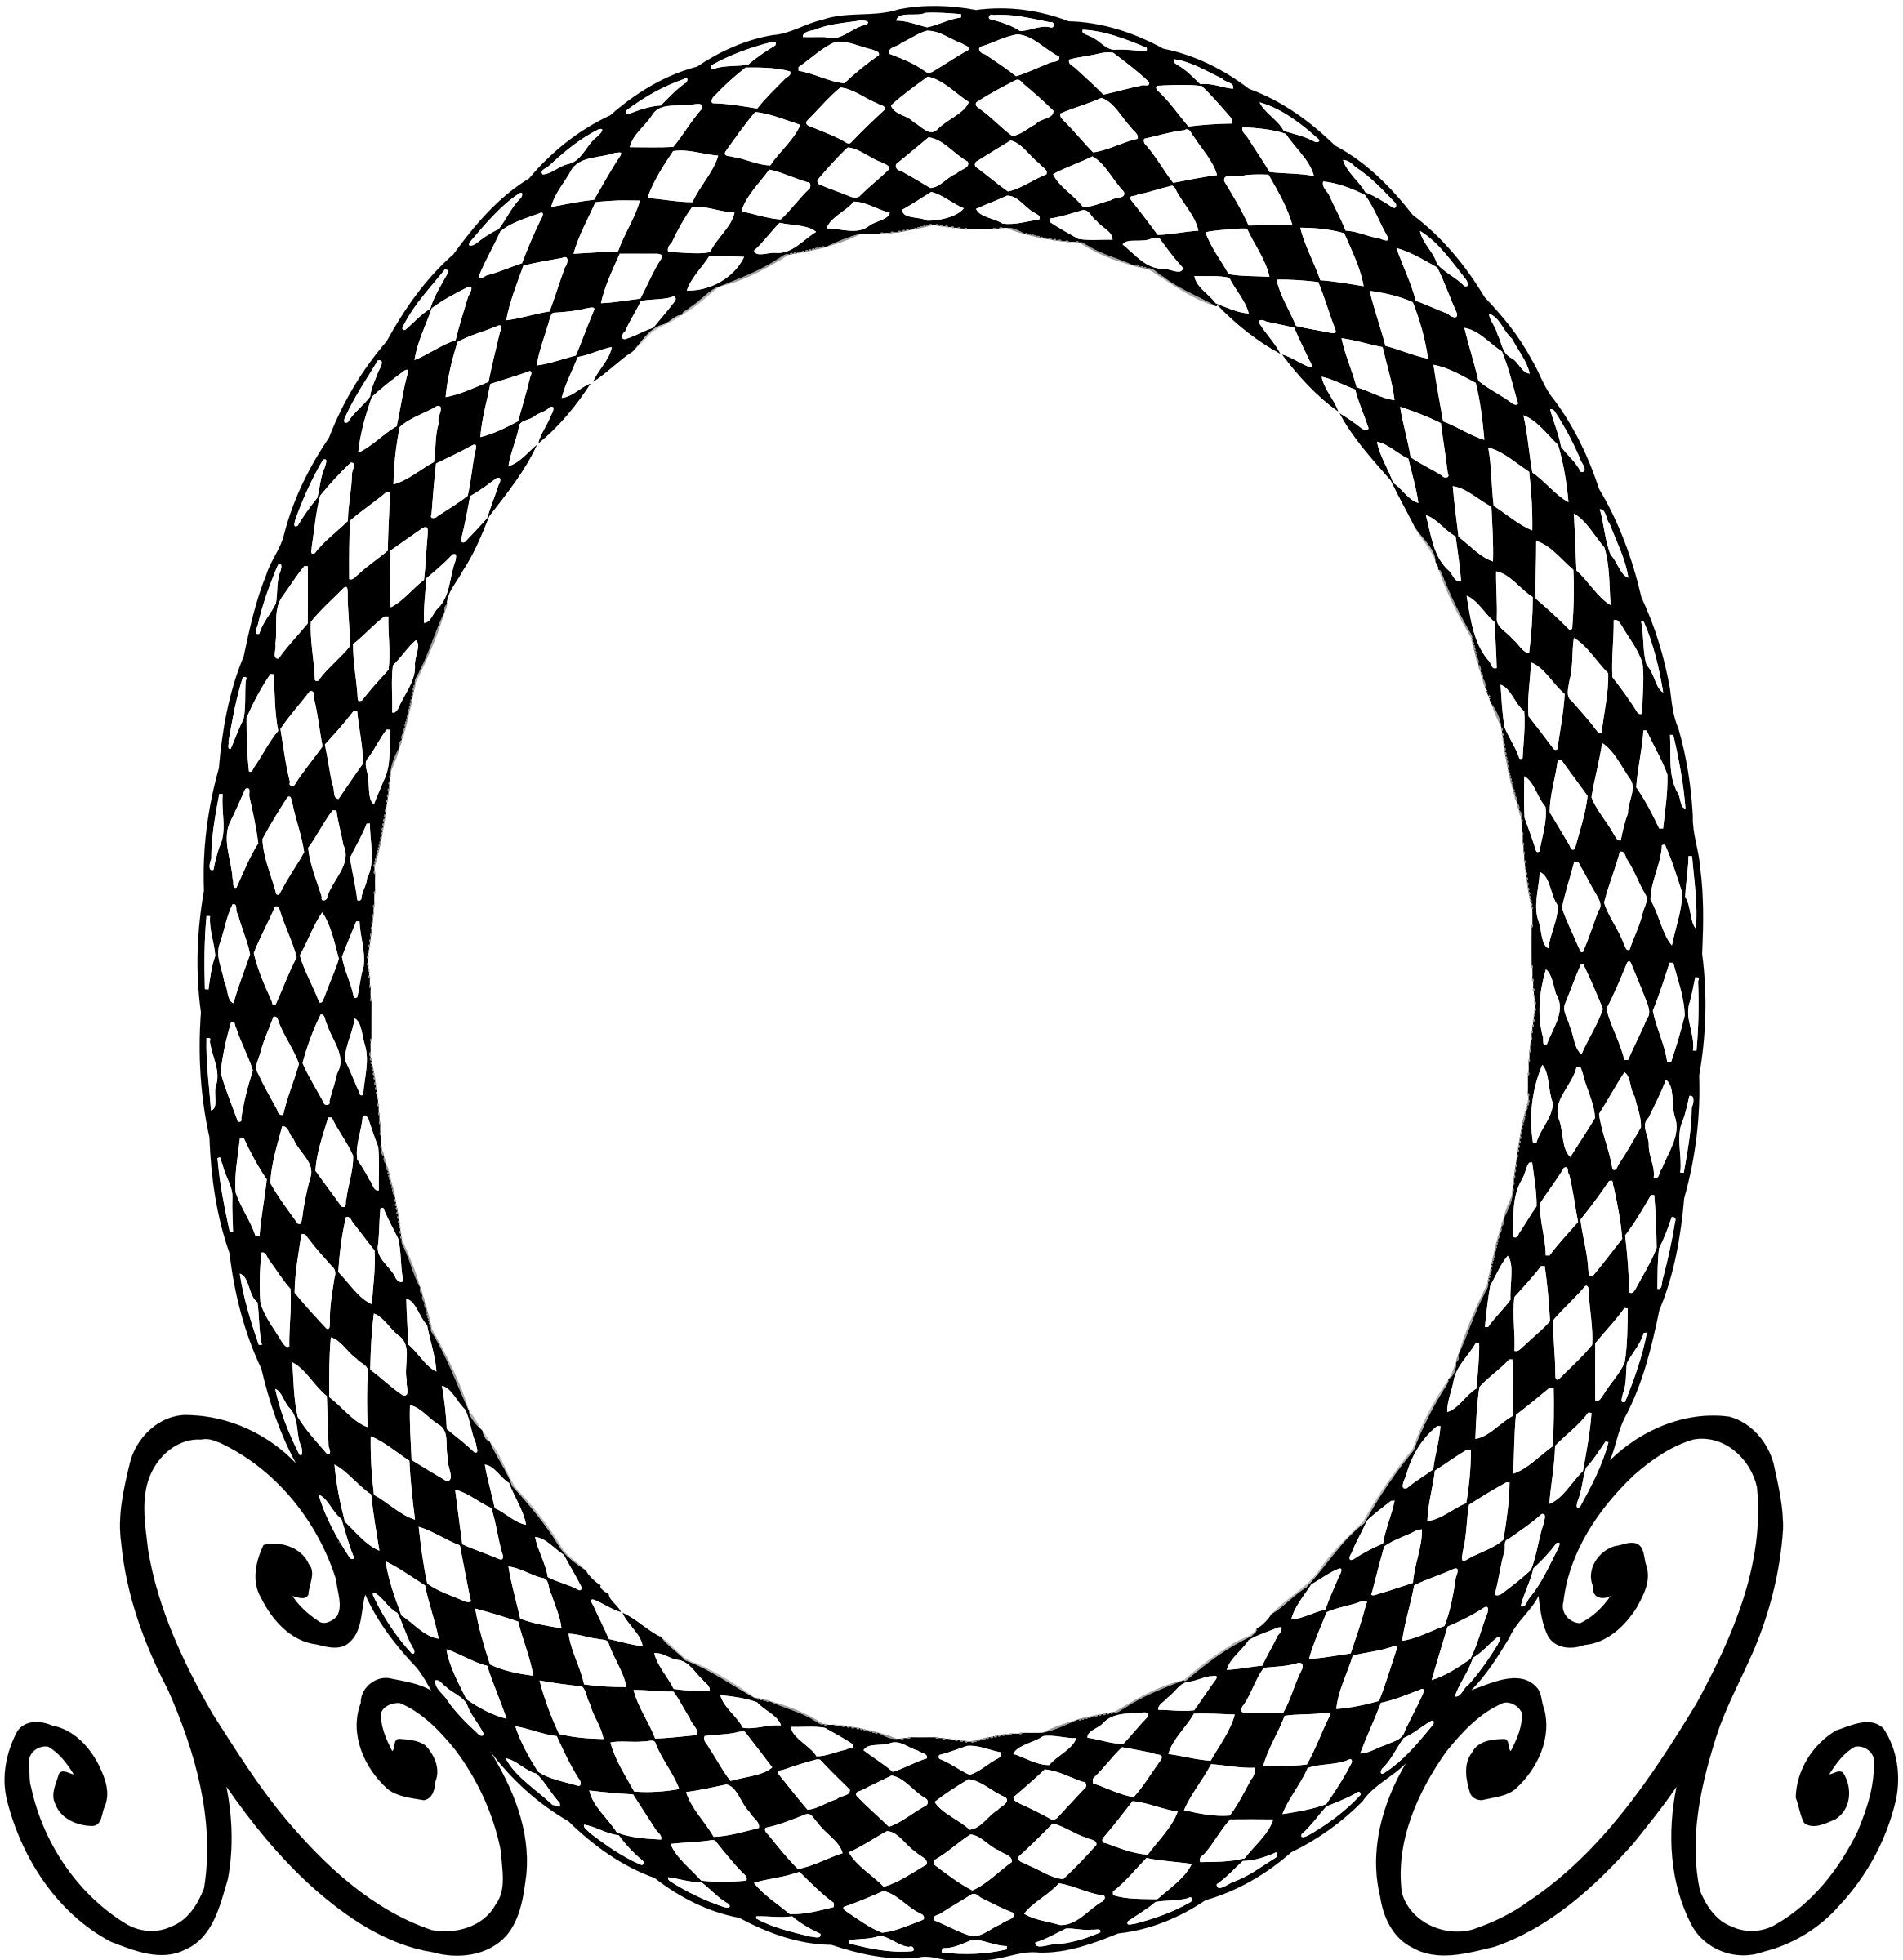 Chequered frame png